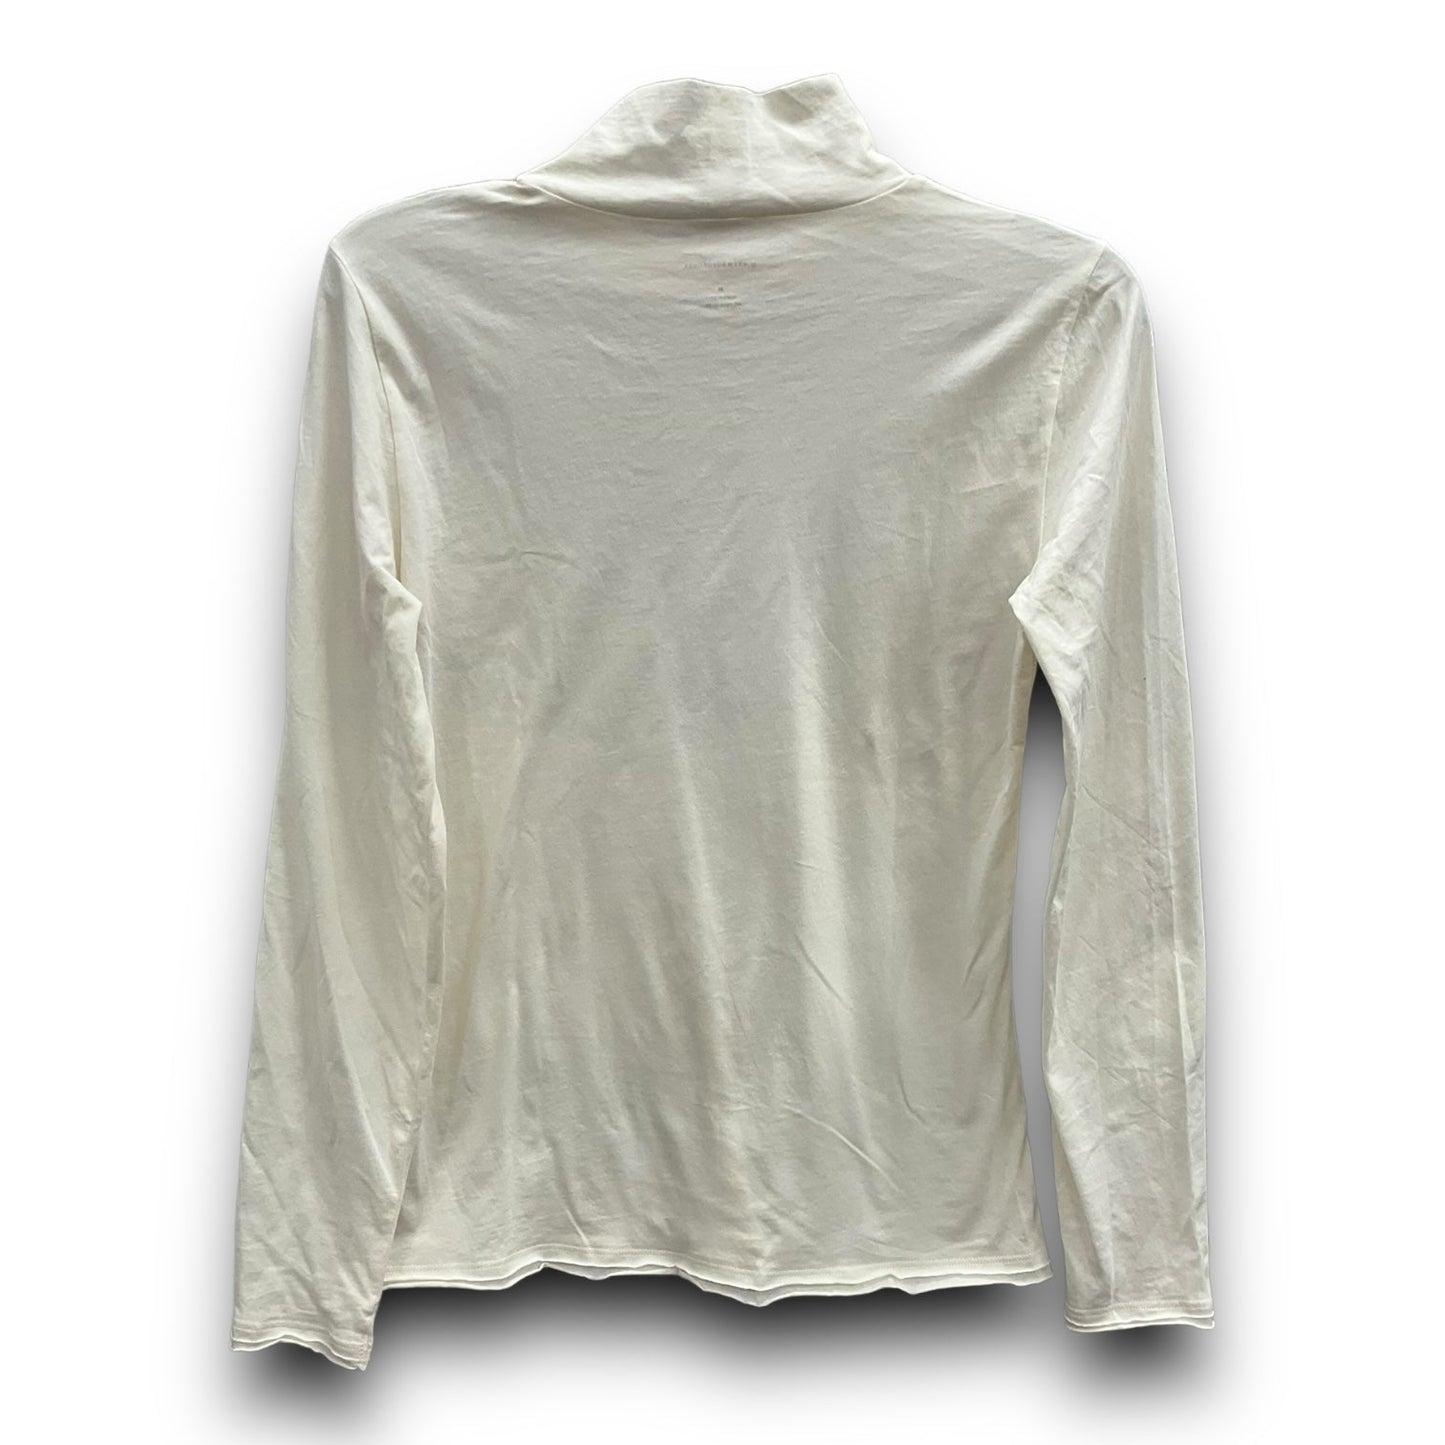 Cream Top Long Sleeve Anthropologie, Size M